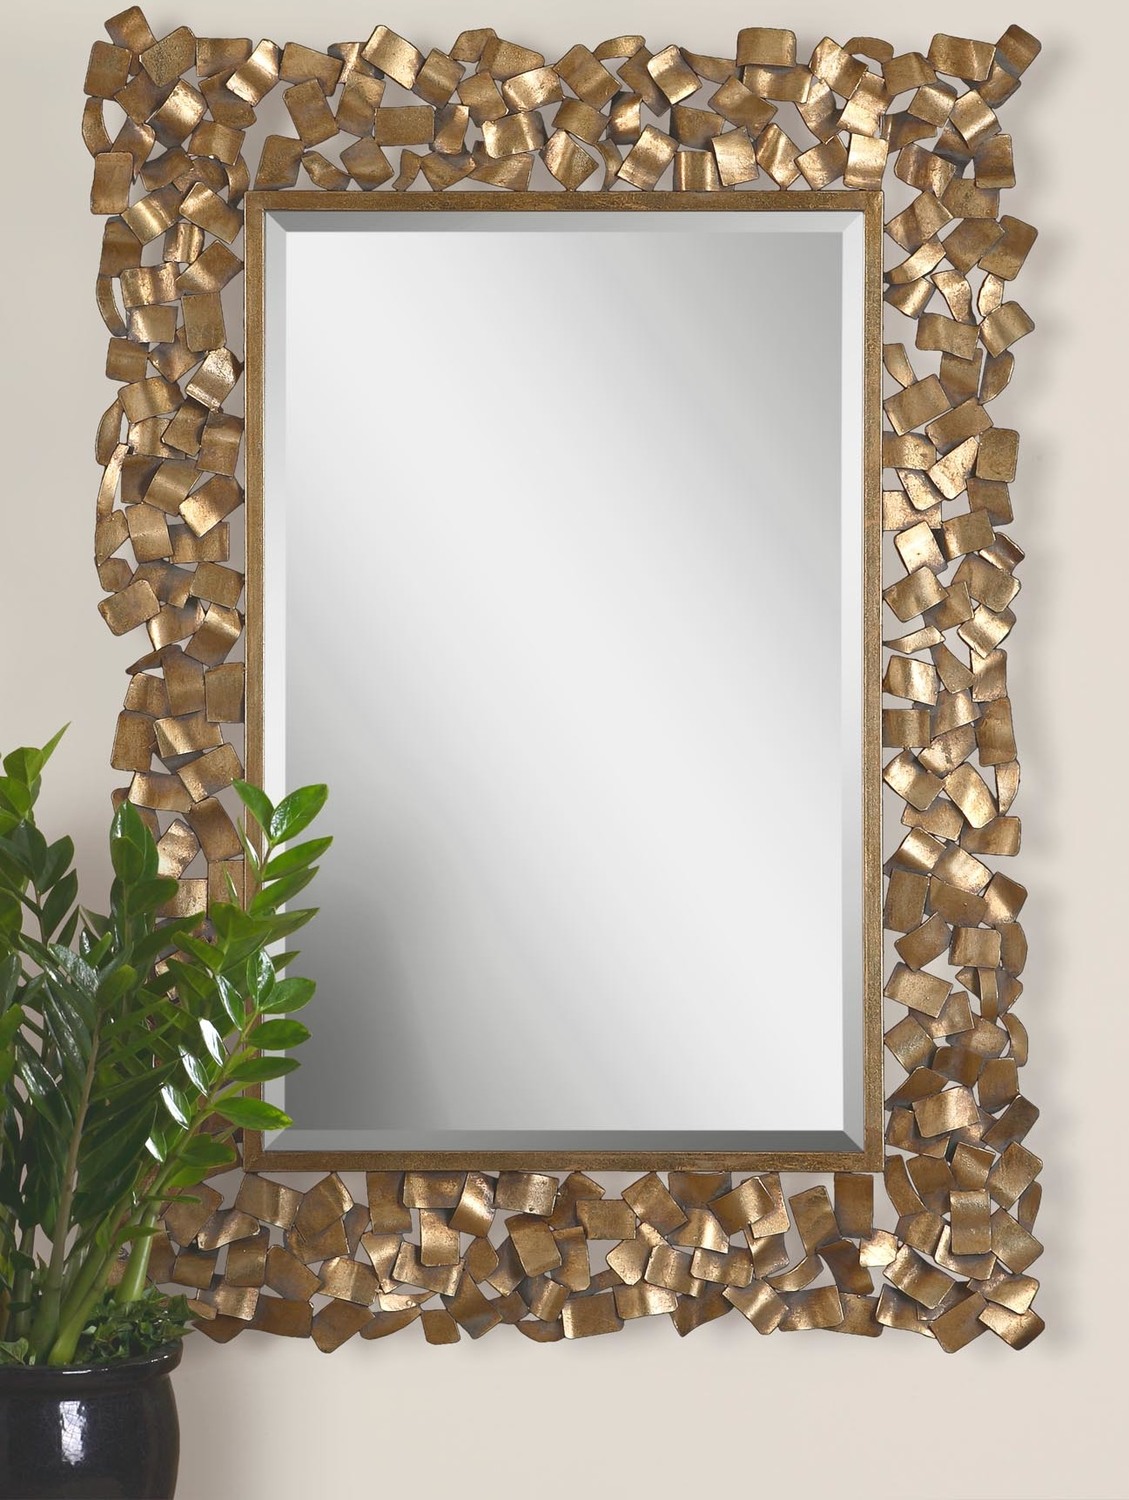 wood frames mirrors Uttermost Antique Gold Mirrors Welded Metal Strips Finished In An Antiqued Gold Leaf With A Light Gray Glaze. Grace Feyock